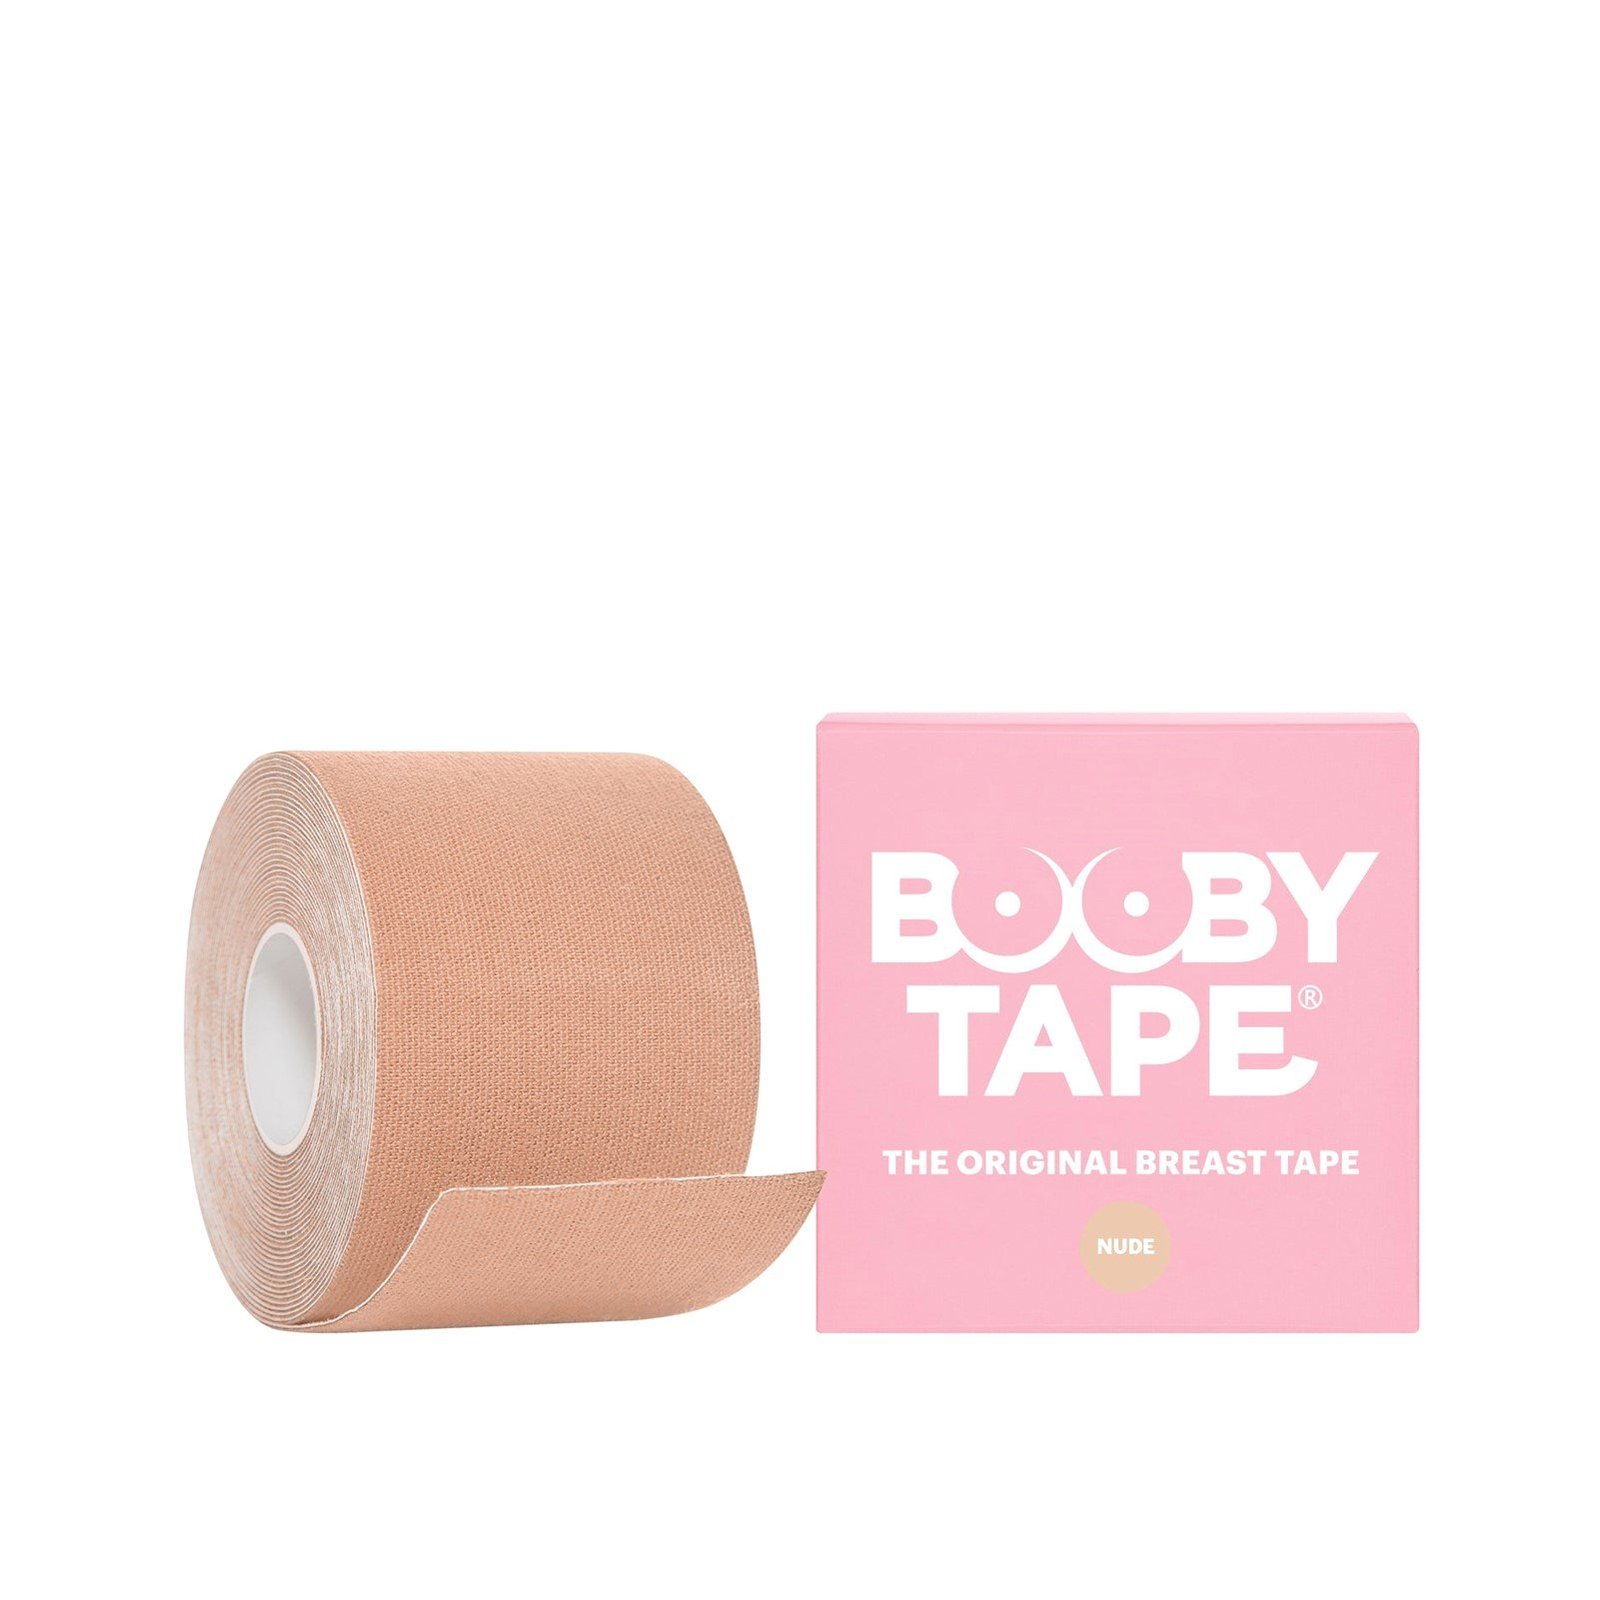 Booby Tape The Original Breast Tape Nude 5m (5.46 yd)